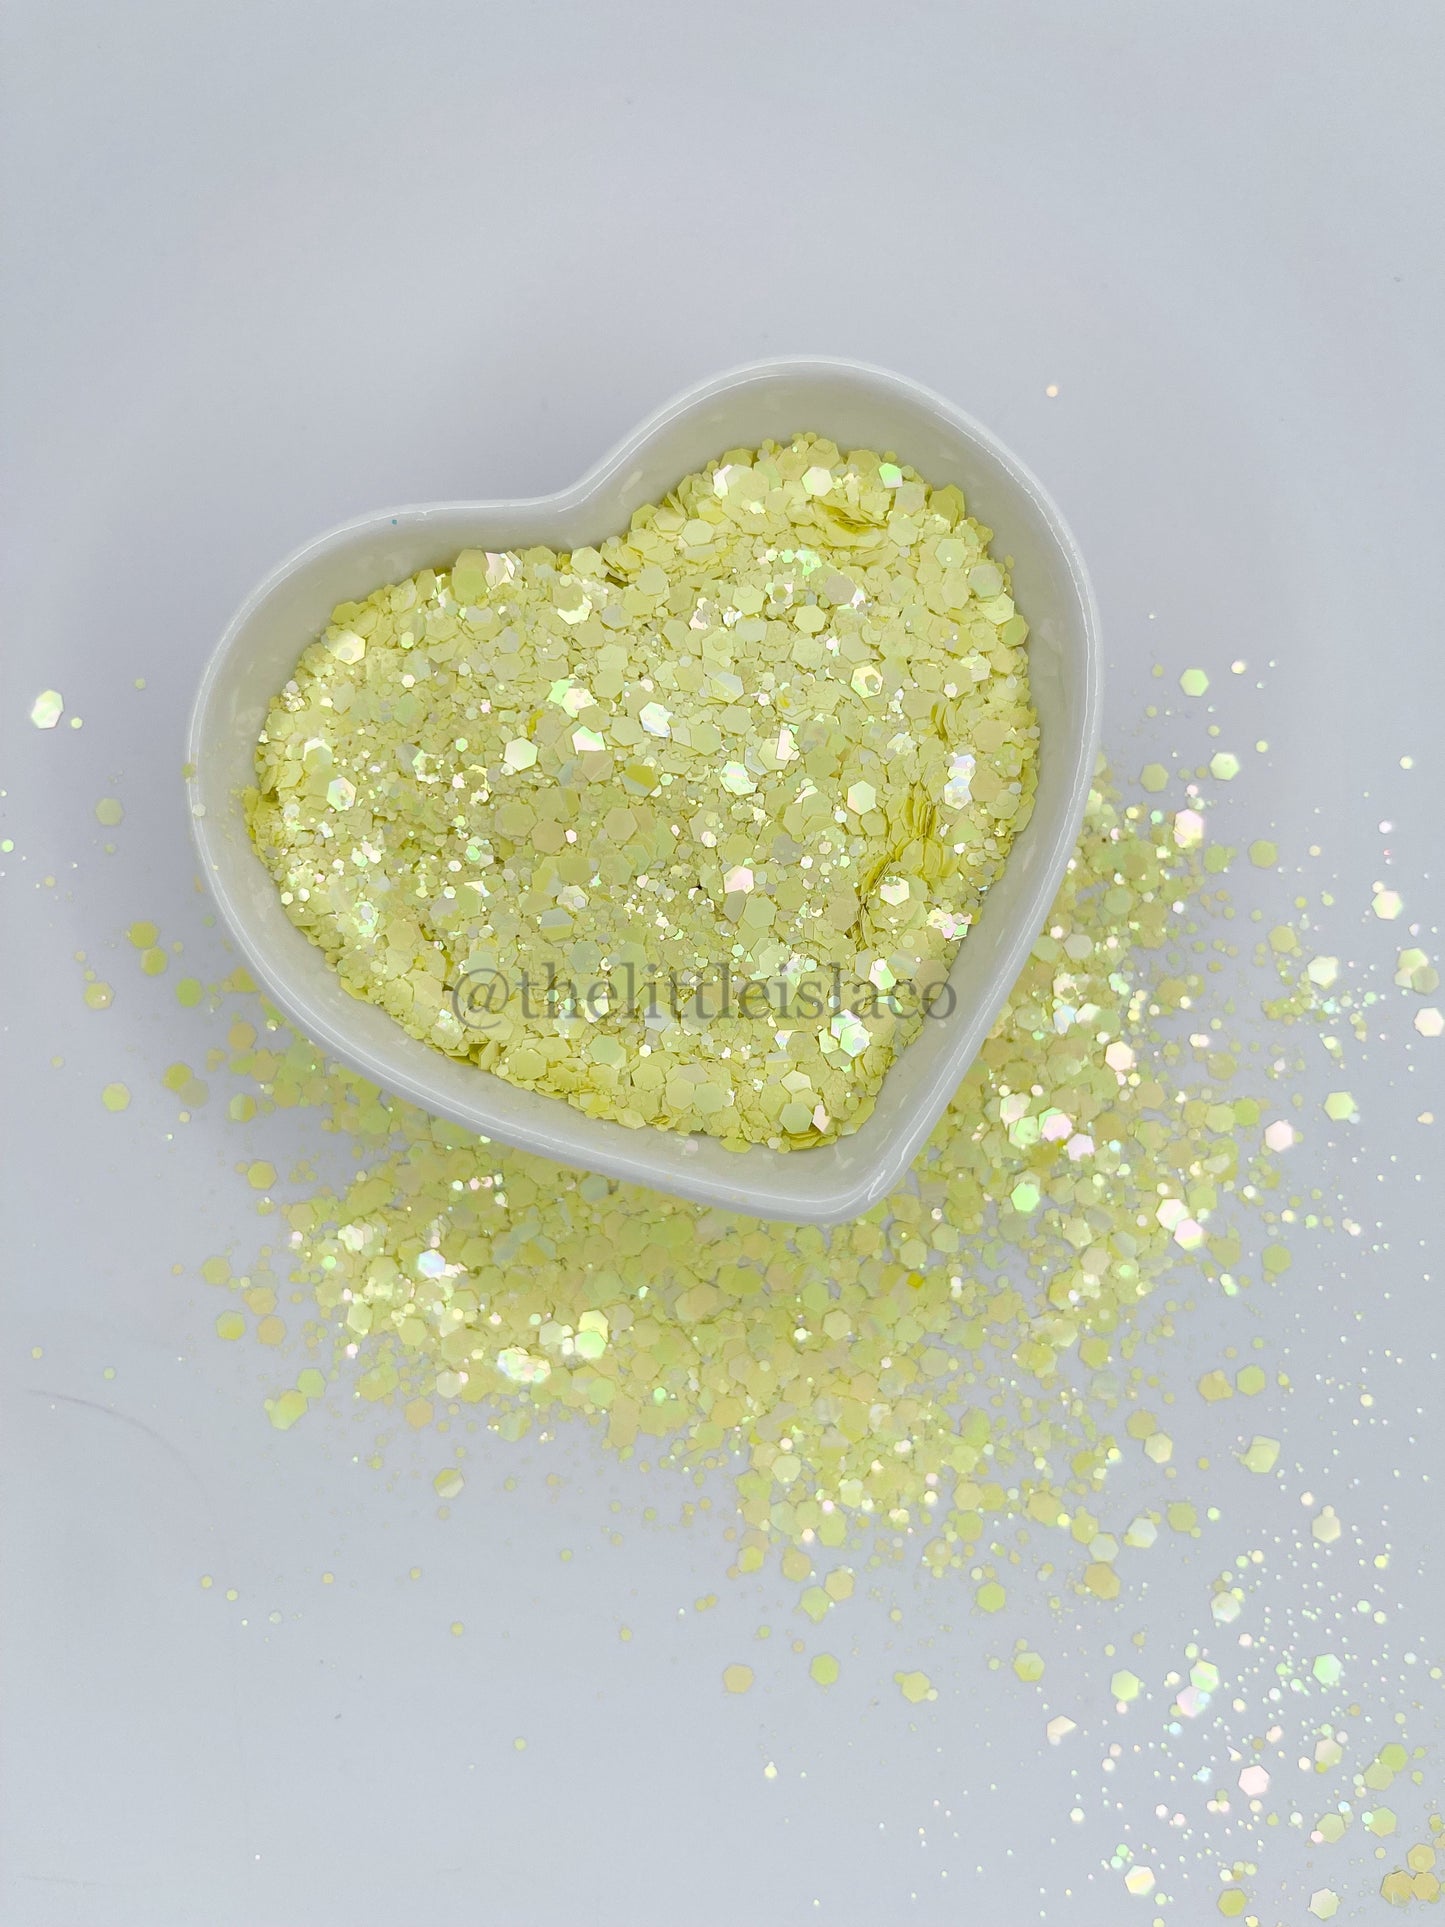 Chunky Glitter Mix - ‘Once Upon a December’ 2.0 - 2oz/56g Pack